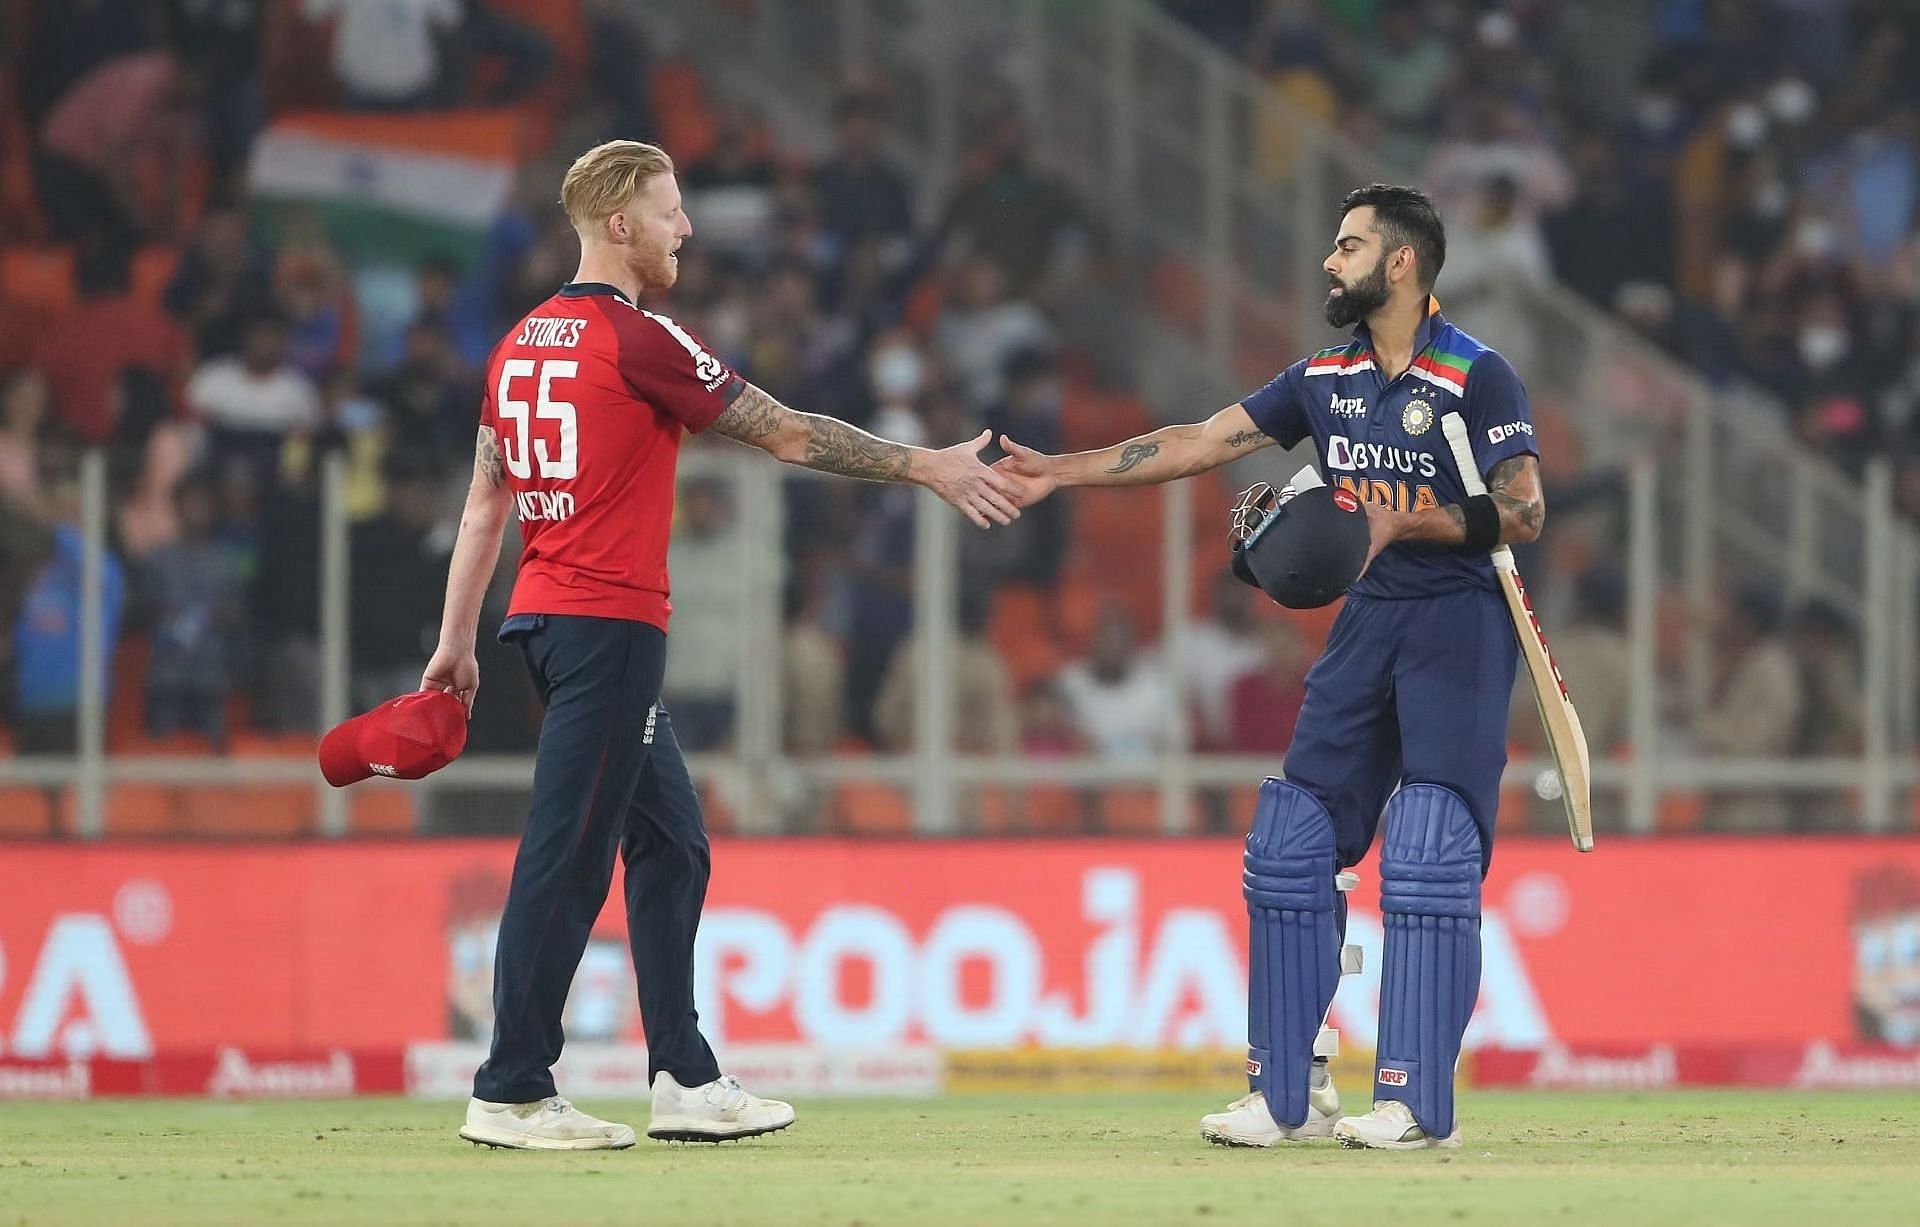 Ben Stokes and Virat Kohli are two of the most competitive modern-day cricketers.